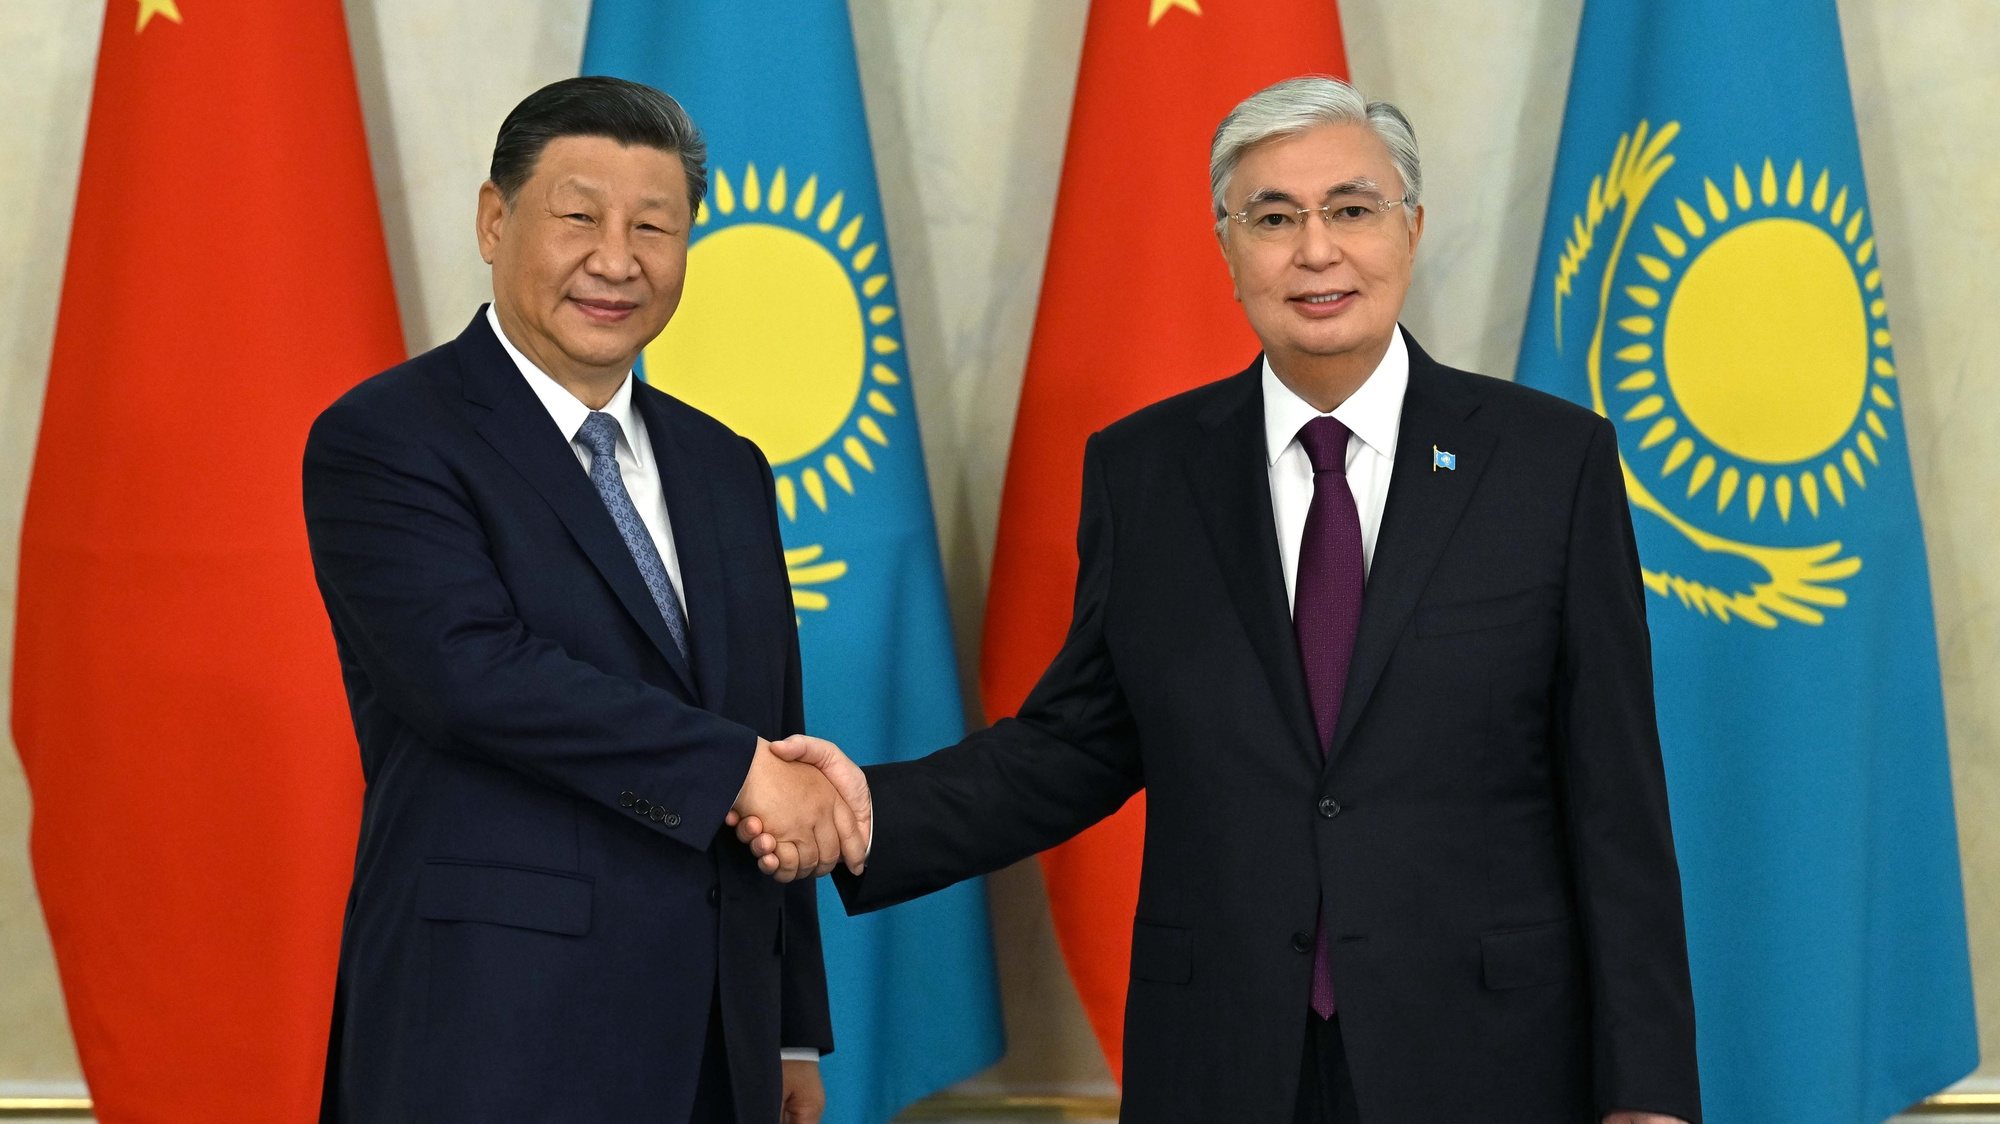 epa11454267 A handout photo made available by the Kazakh President press service shows Kazakhstan&#039;s President Kassym-Jomart Tokayev (R) and China&#039;s President Xi Jinping (L) shaking hands during their meeting at the palace in Astana, Kazakhstan, 03 July 2024. Xi Jinping arrived in Kazakhstan to attend the Shanghai Cooperation Organization (SCO) summit taking place in Astana from 03 to 04 July 2024.  EPA/KAZAKH PRESIDENT PRESS SERVICE HANDOUT  HANDOUT EDITORIAL USE ONLY/NO SALES